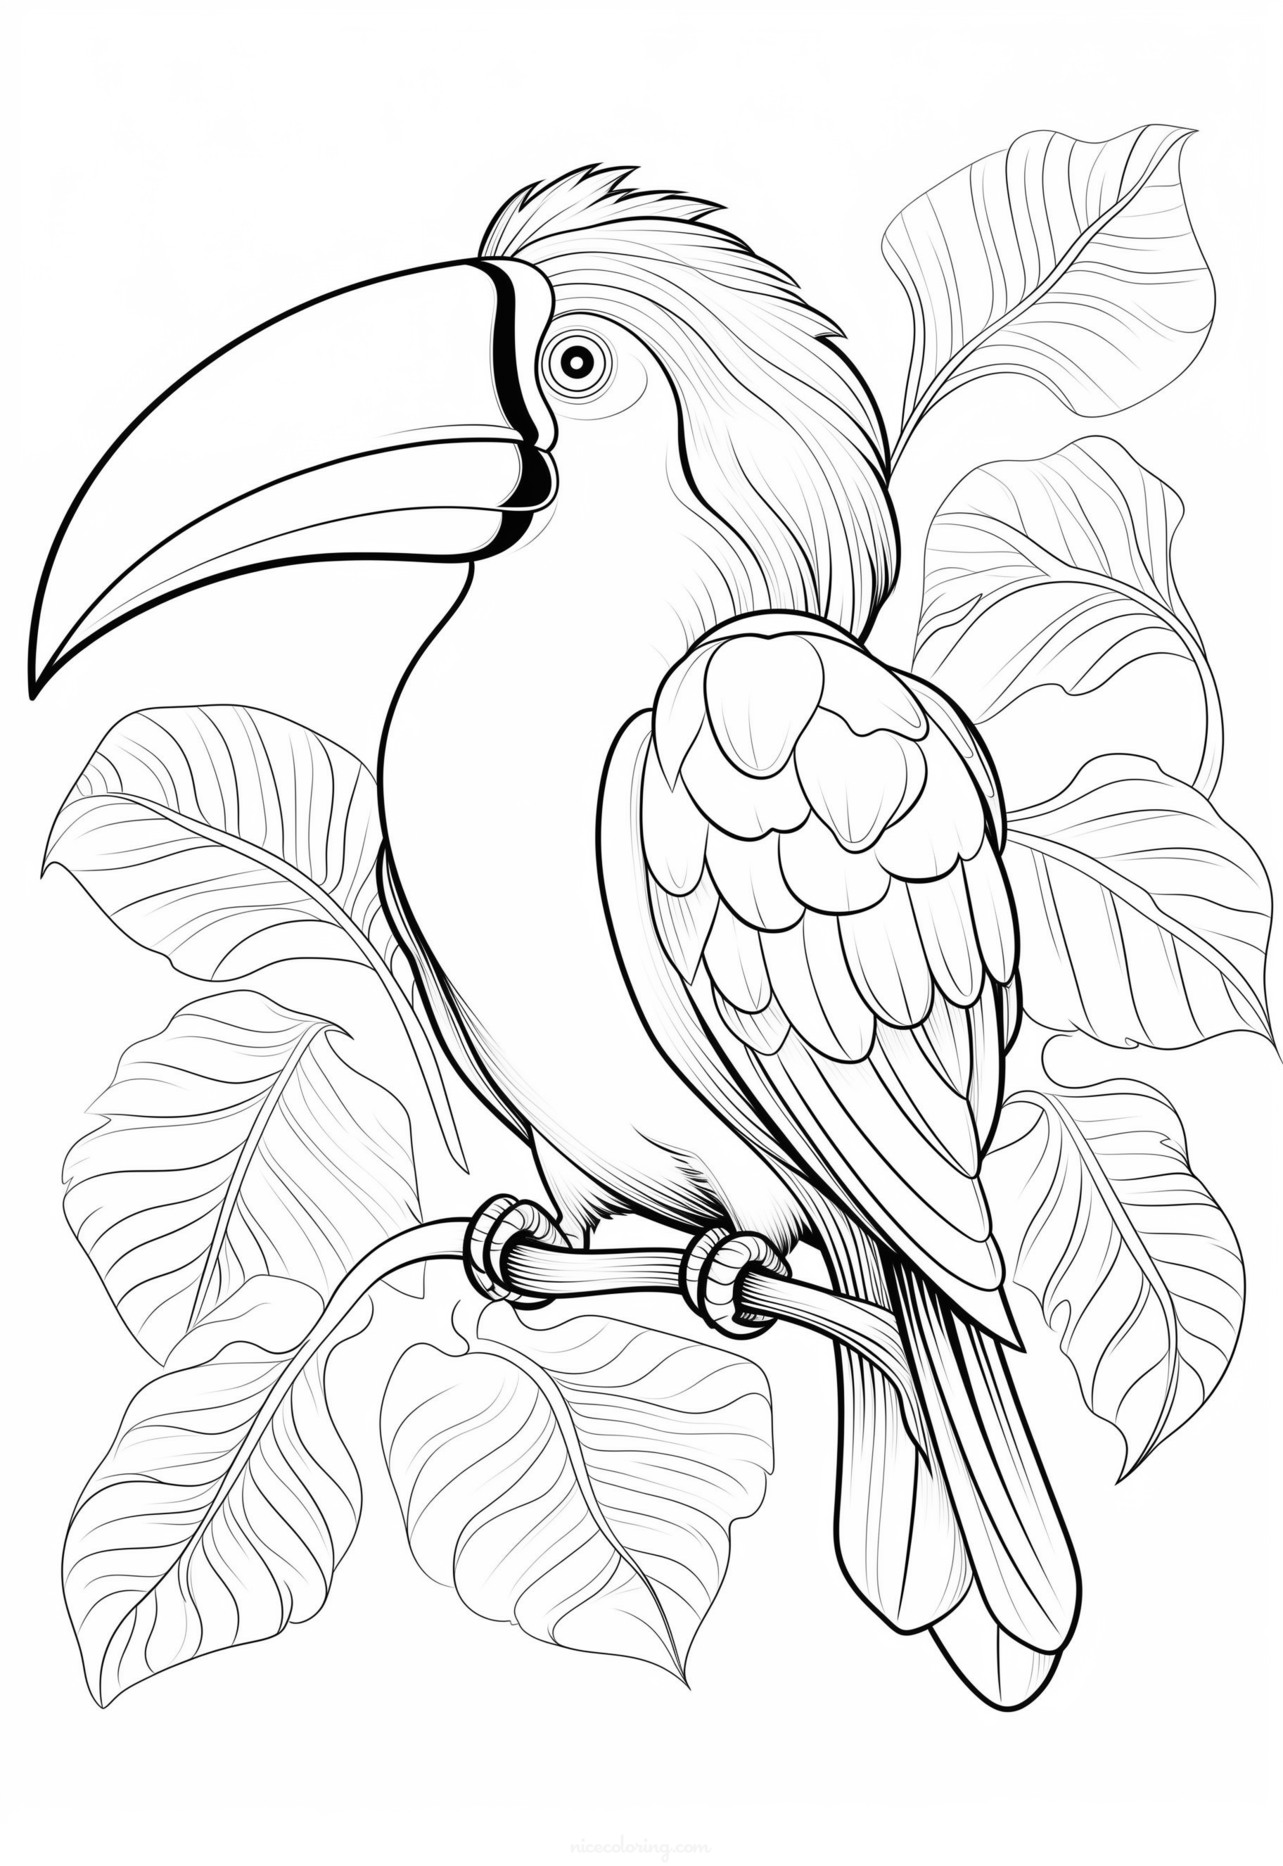 A variety of birds perched on branches in a nature scene coloring.